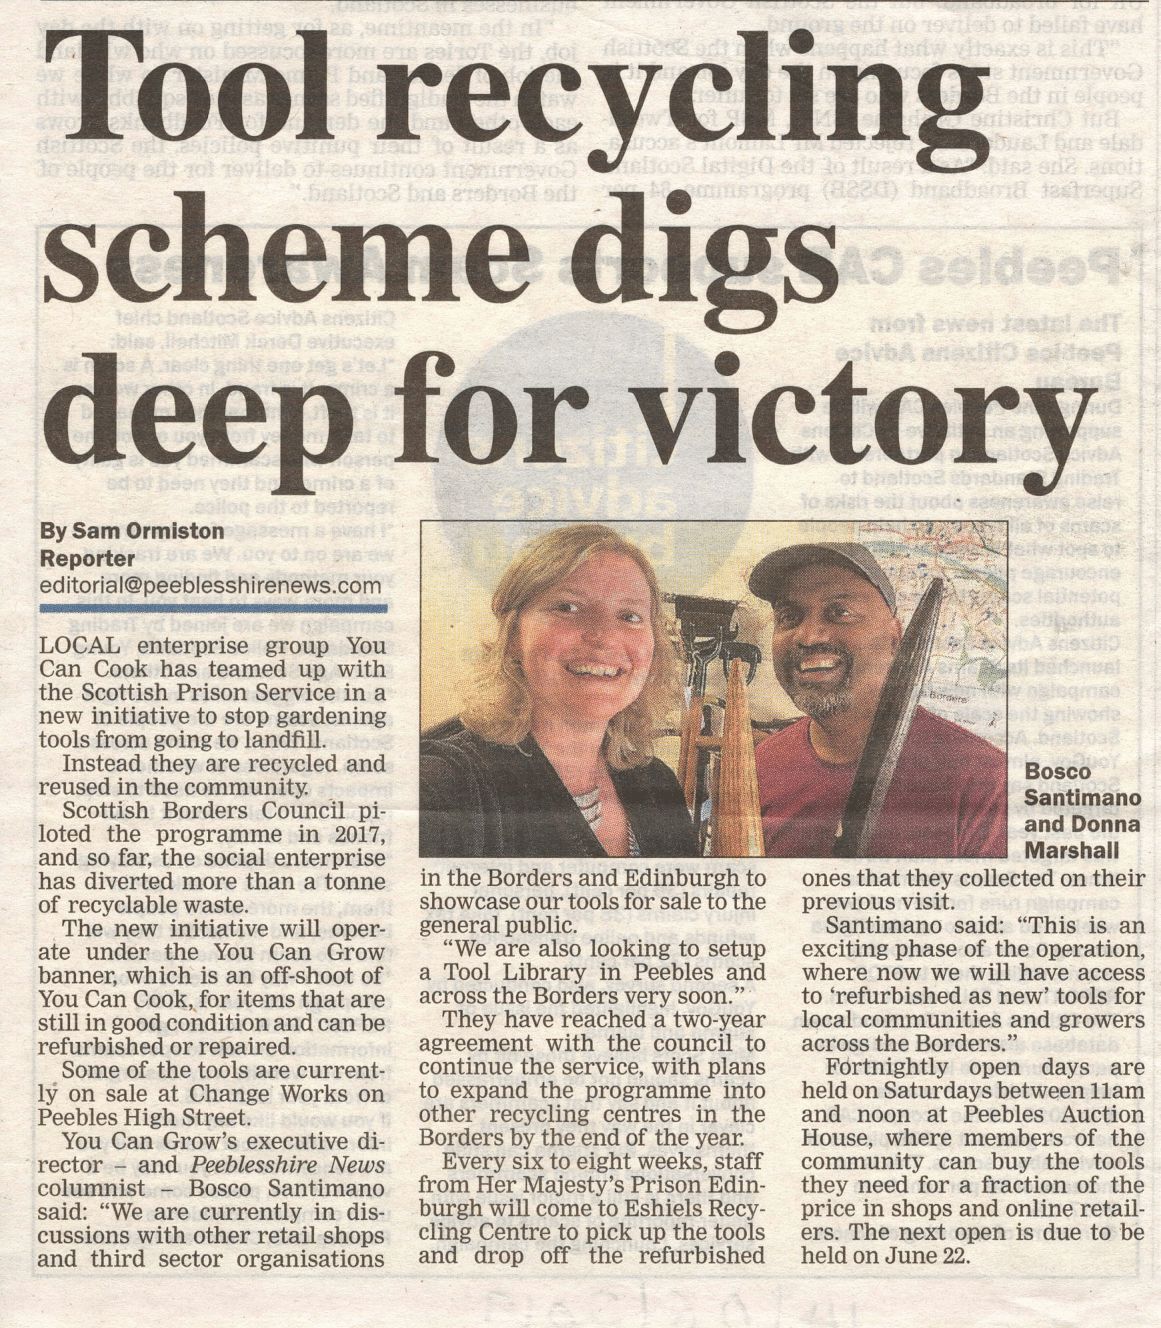 Press Clipping: Tool recycling scheme digs deep for victory